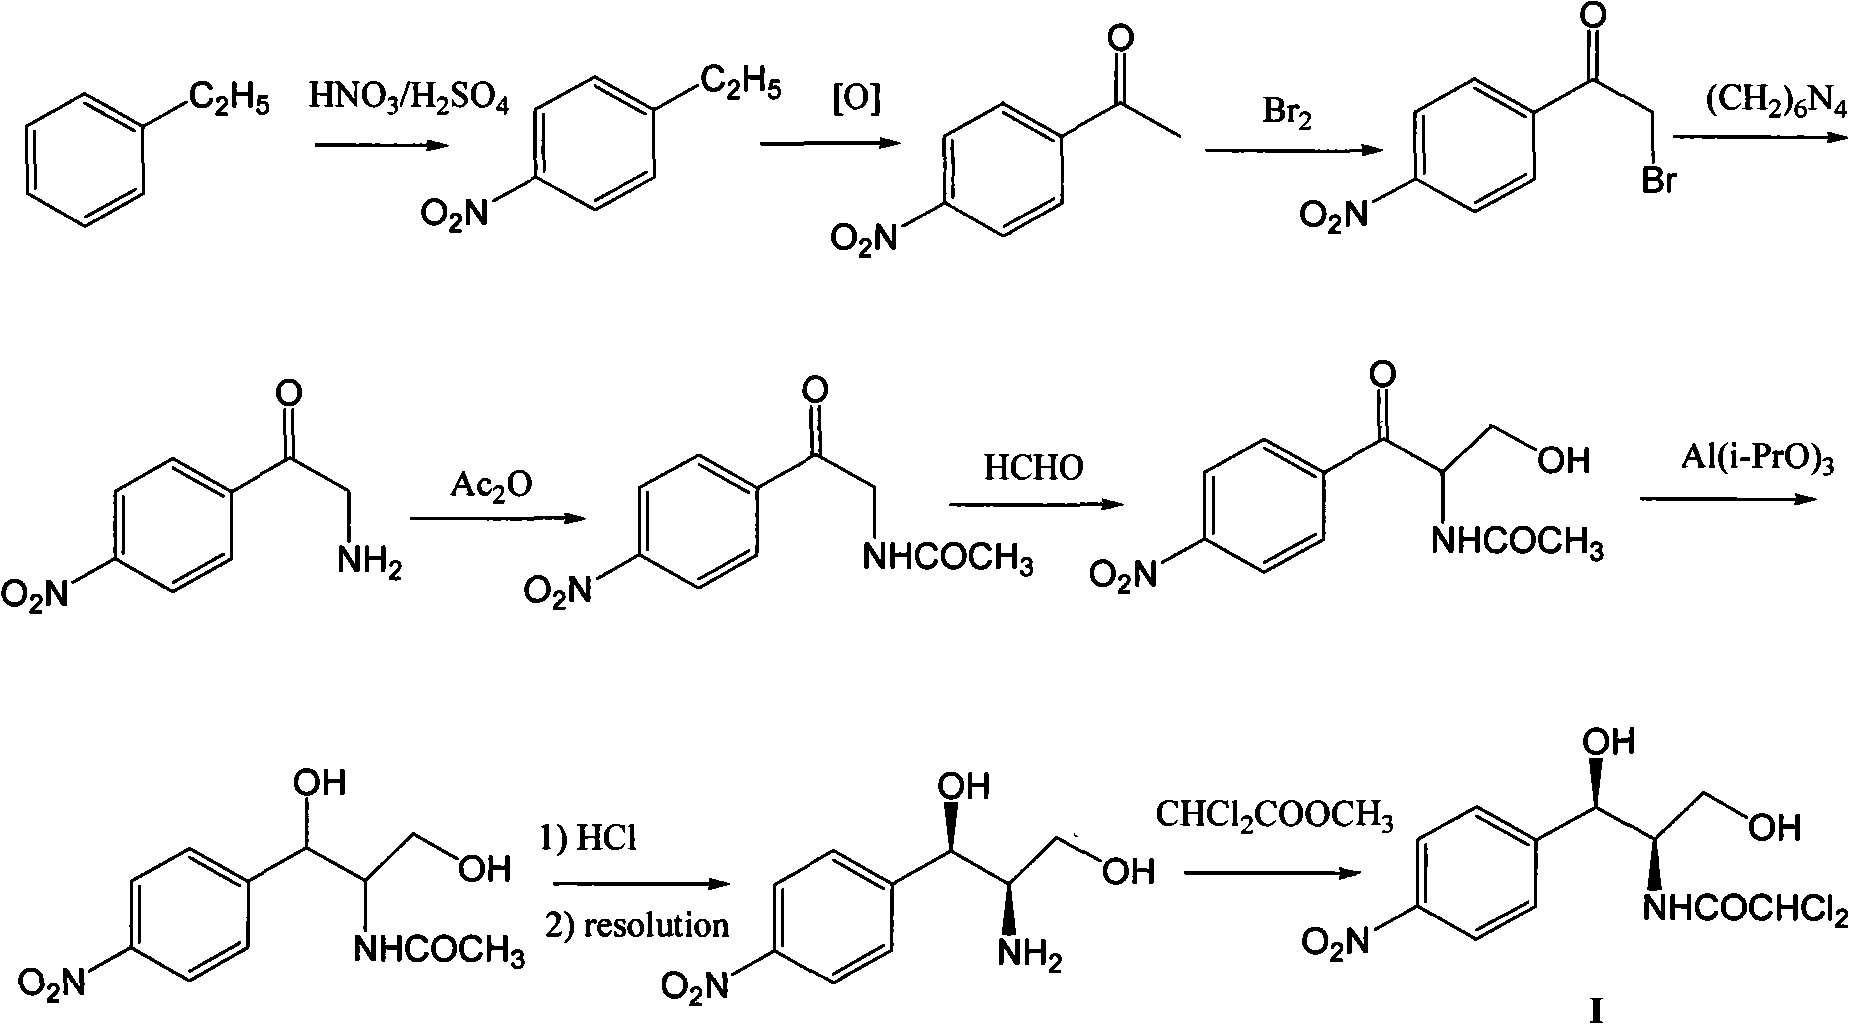 Method for synthesizing chloramphenicol from 4-chloro-benzaldehyde